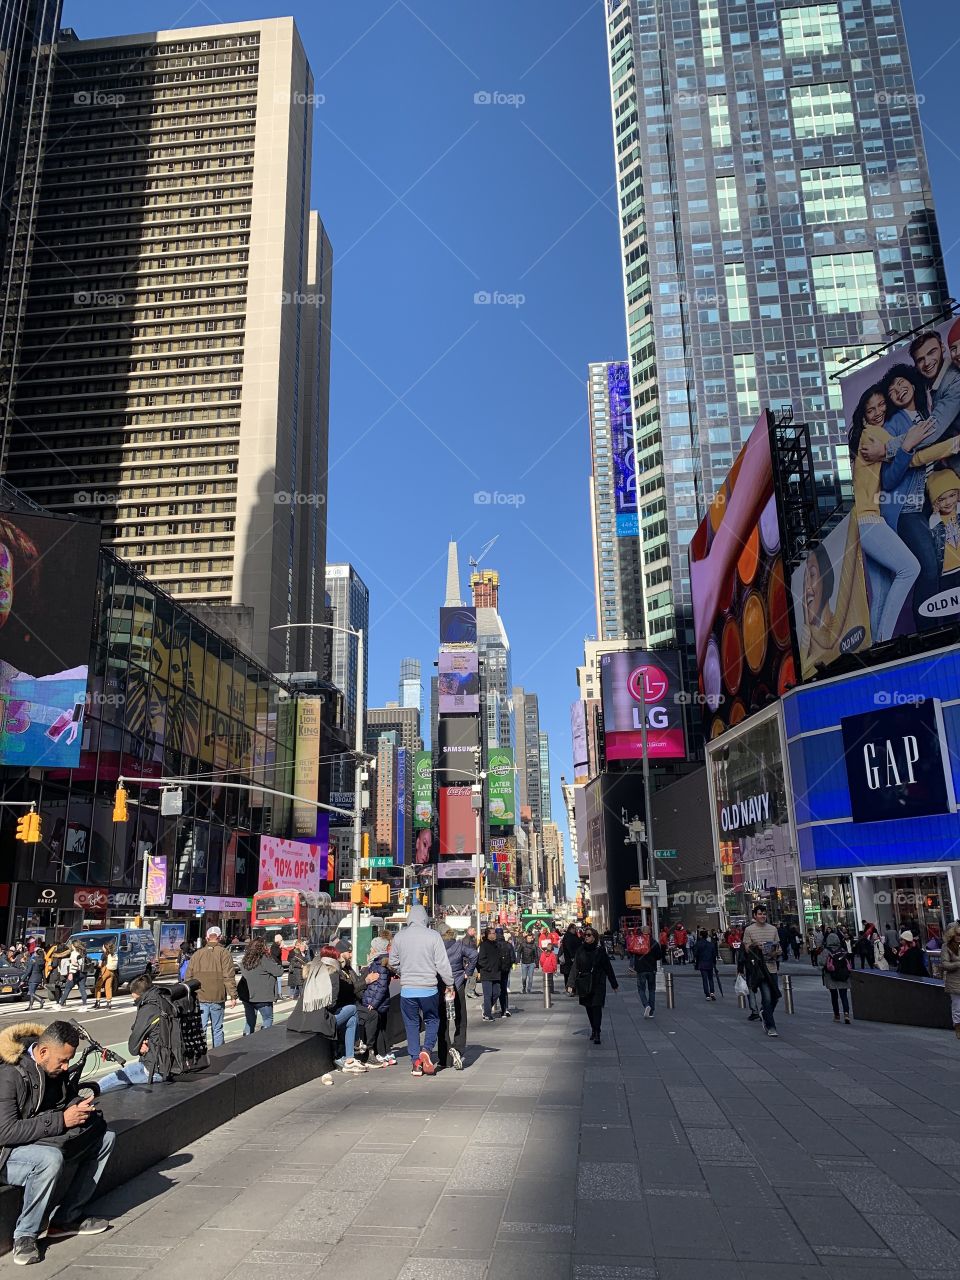 Times Square - Daytime